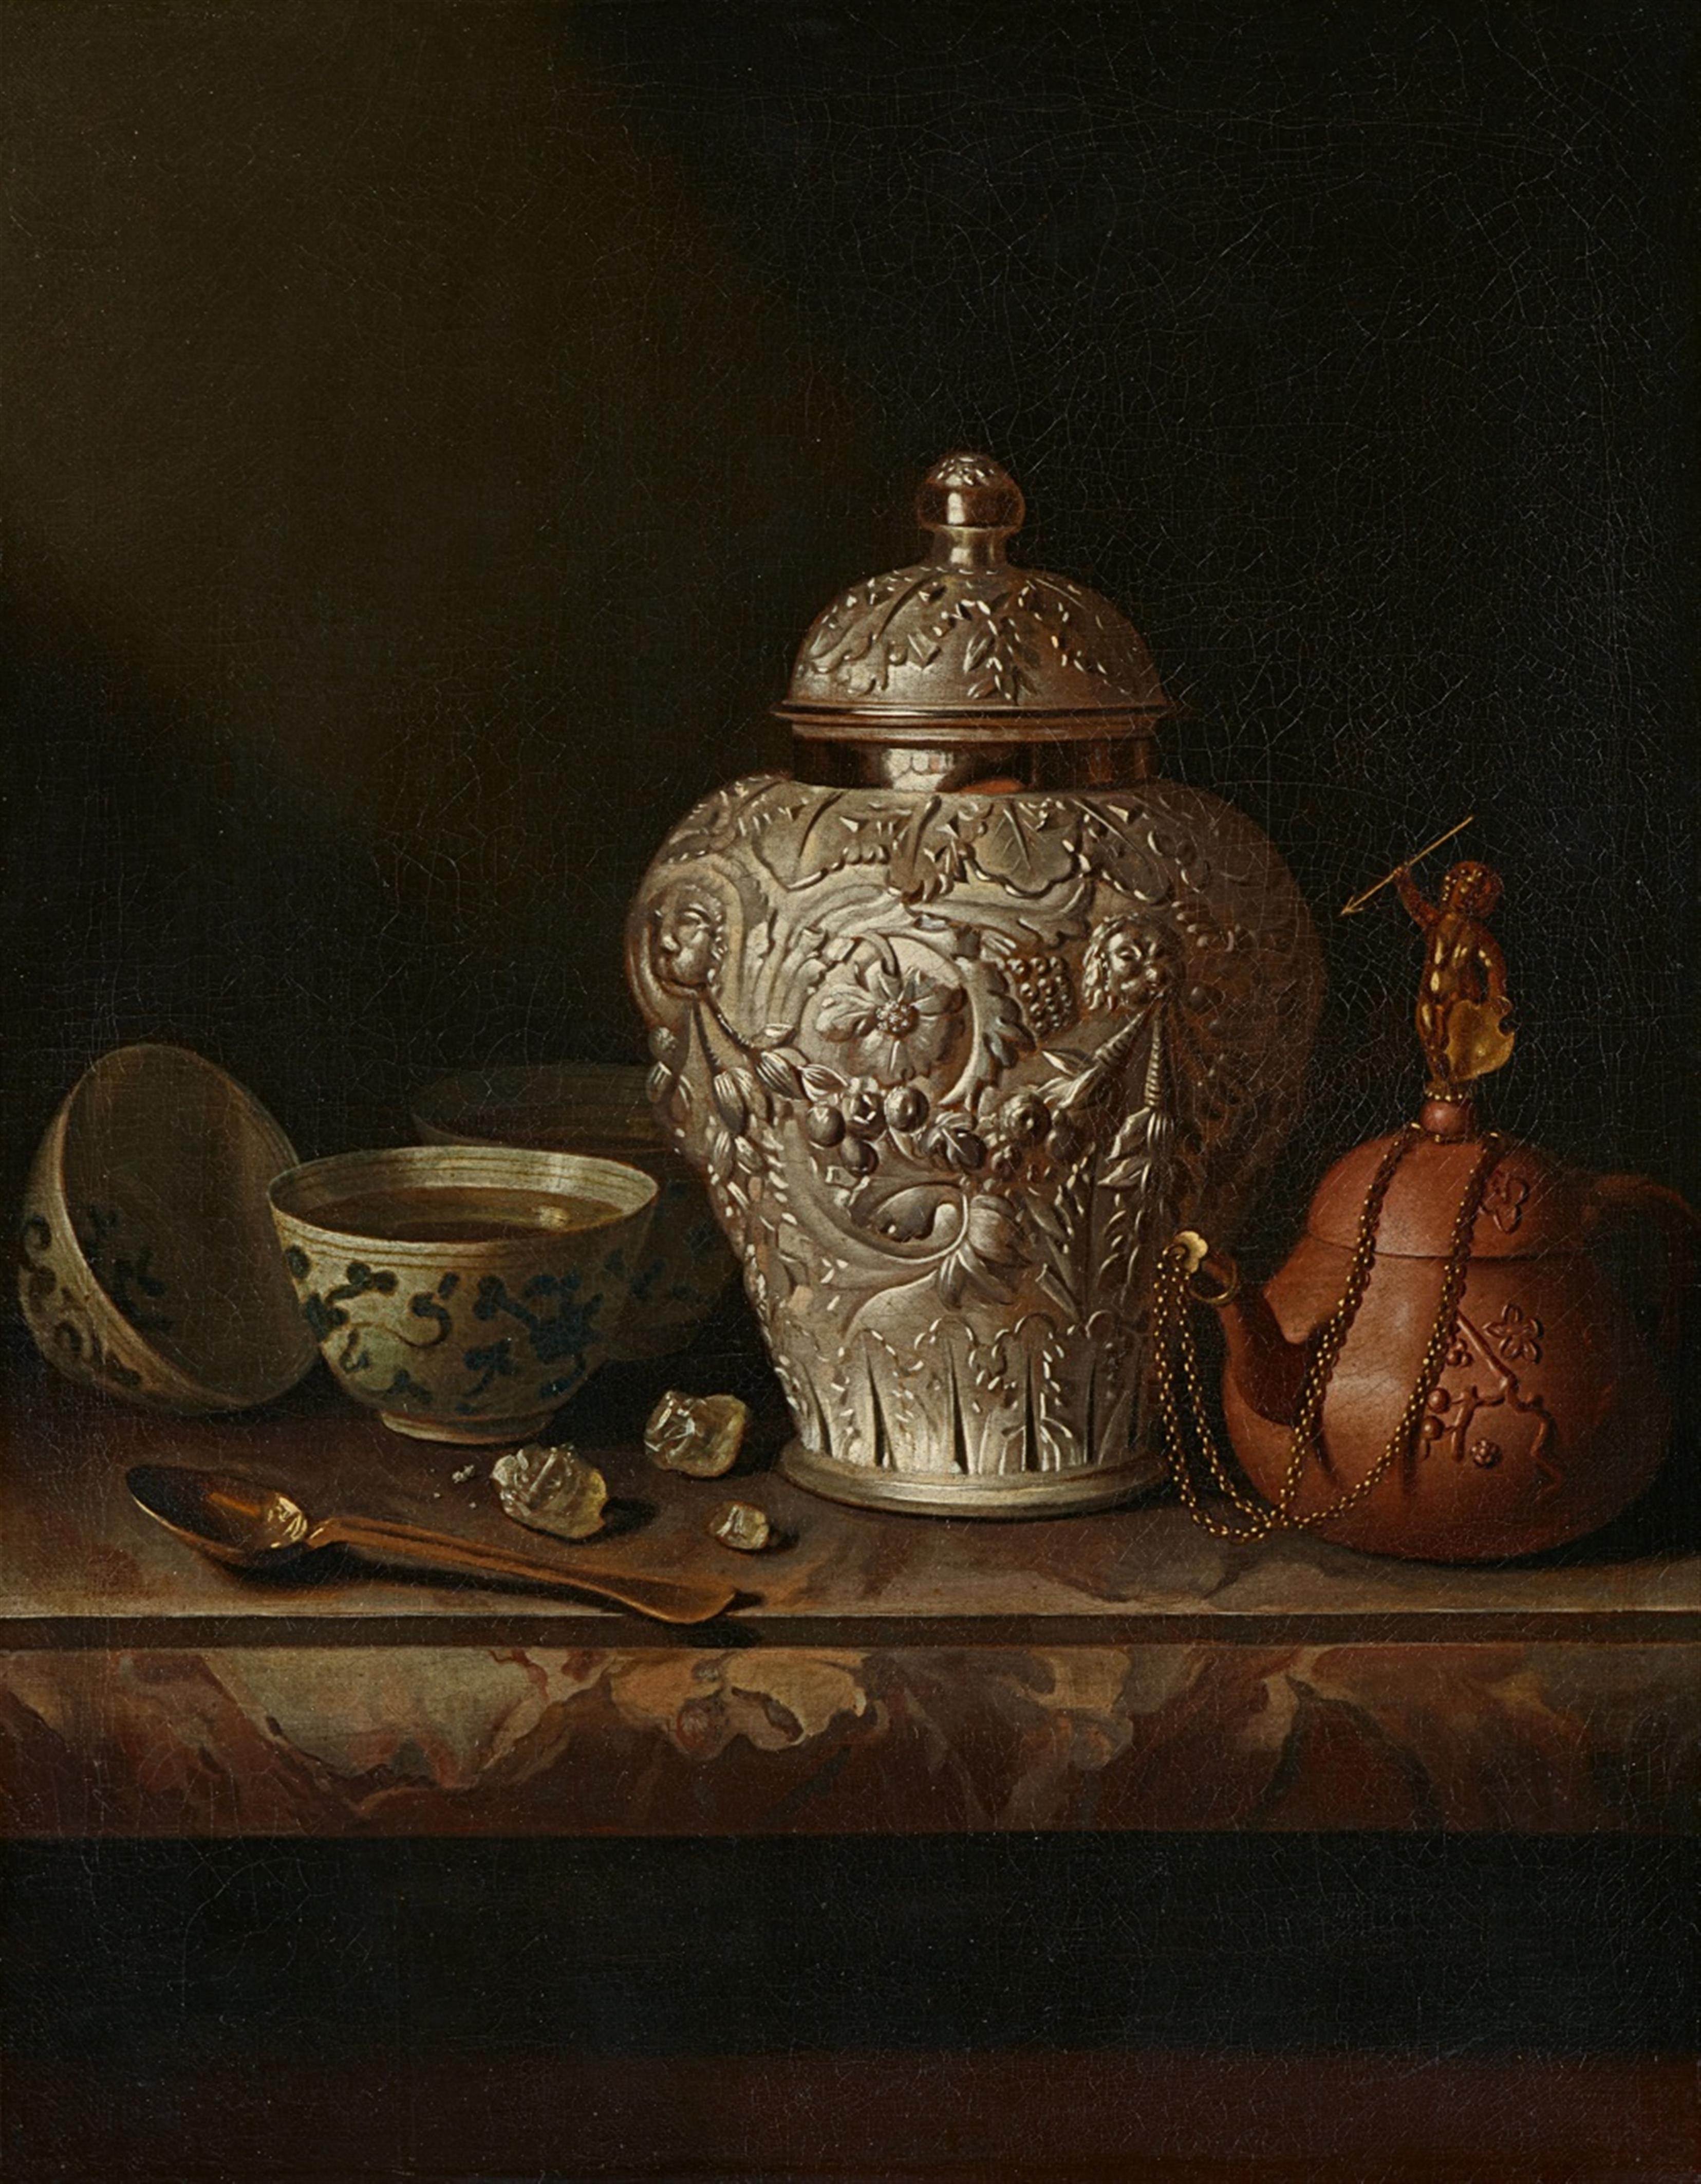 Pieter Gerritsz. van Roestraten - Still life with a Silver Ginger Jar and a Teapot on a Ledge - image-1